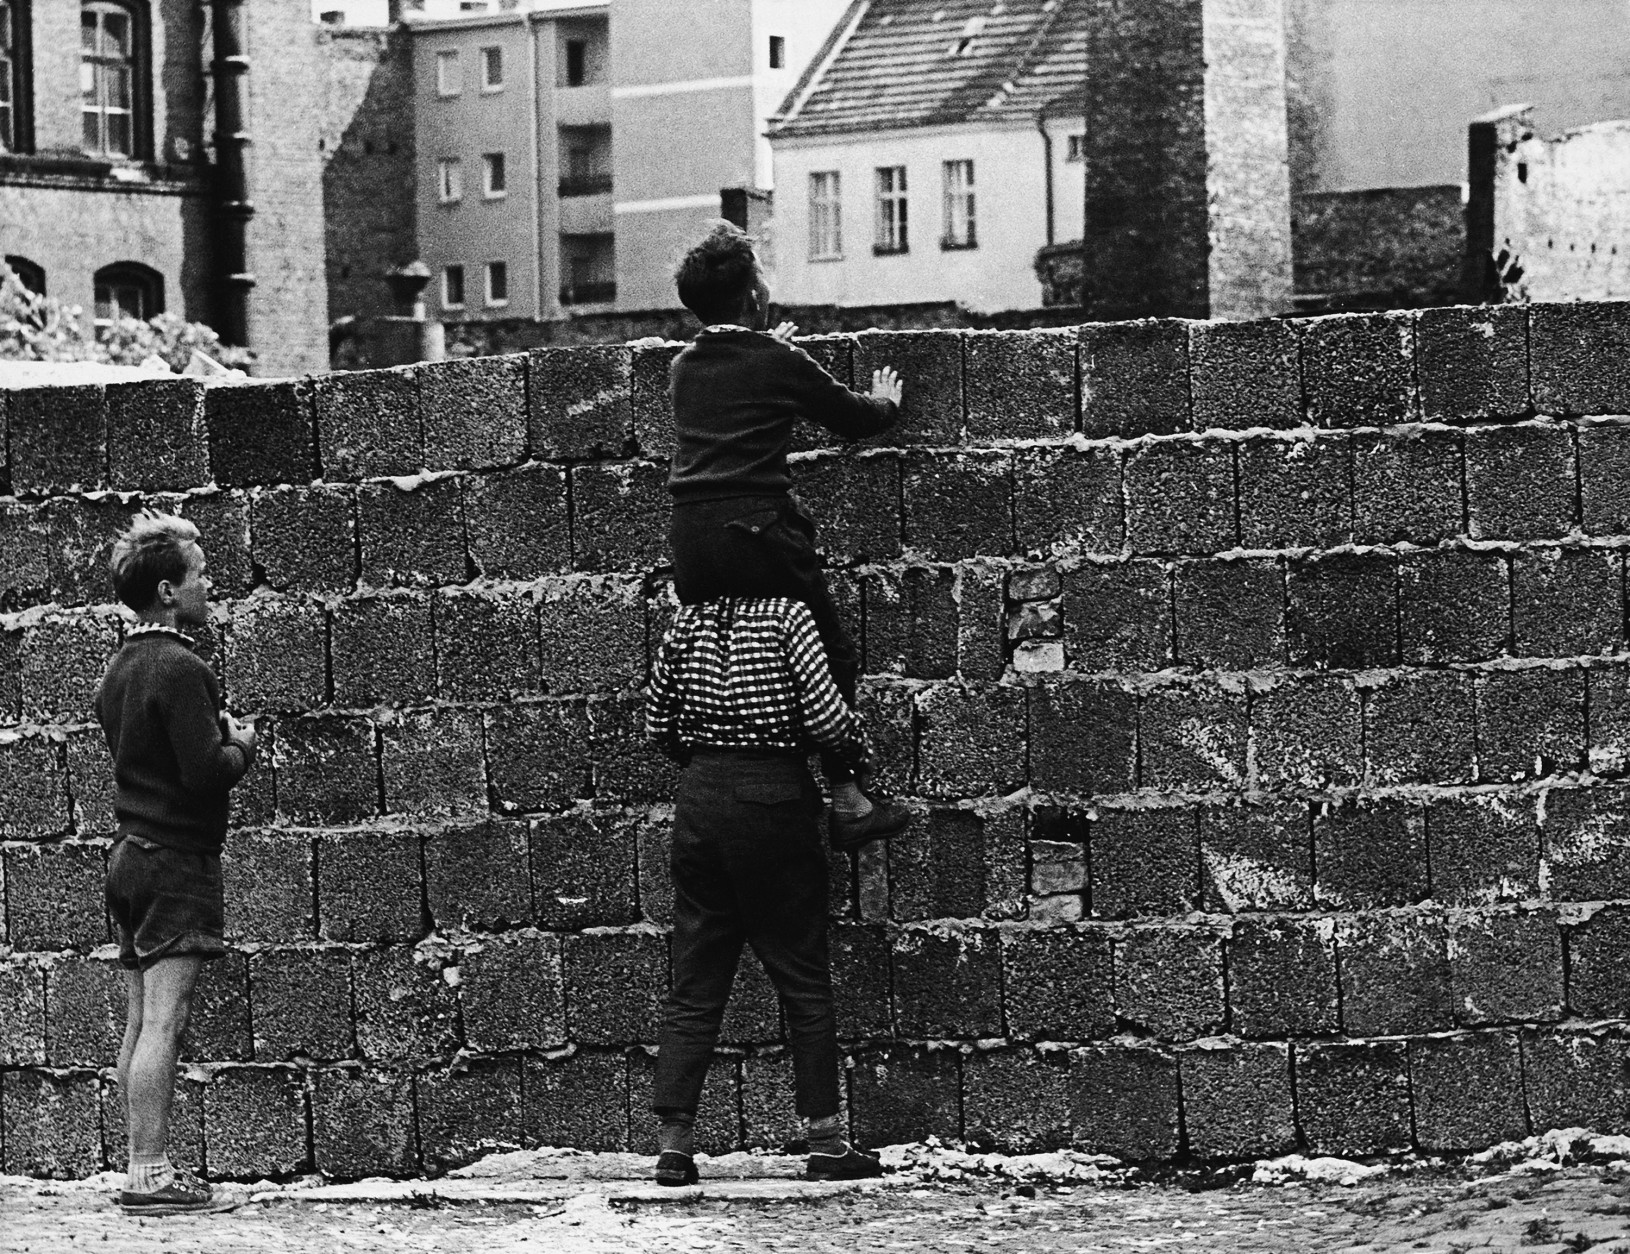 On August 13, 1961, East Germany sealed off the border between Berlin's eastern and western sectors; within days, the Communist authorities began building a wall that would stand for the next 28 years. Here, a boy sitting on the shoulders of another child peers at the Liesen Street in Wedding, West Berlin. (AP Photo/Werner Kreusch)